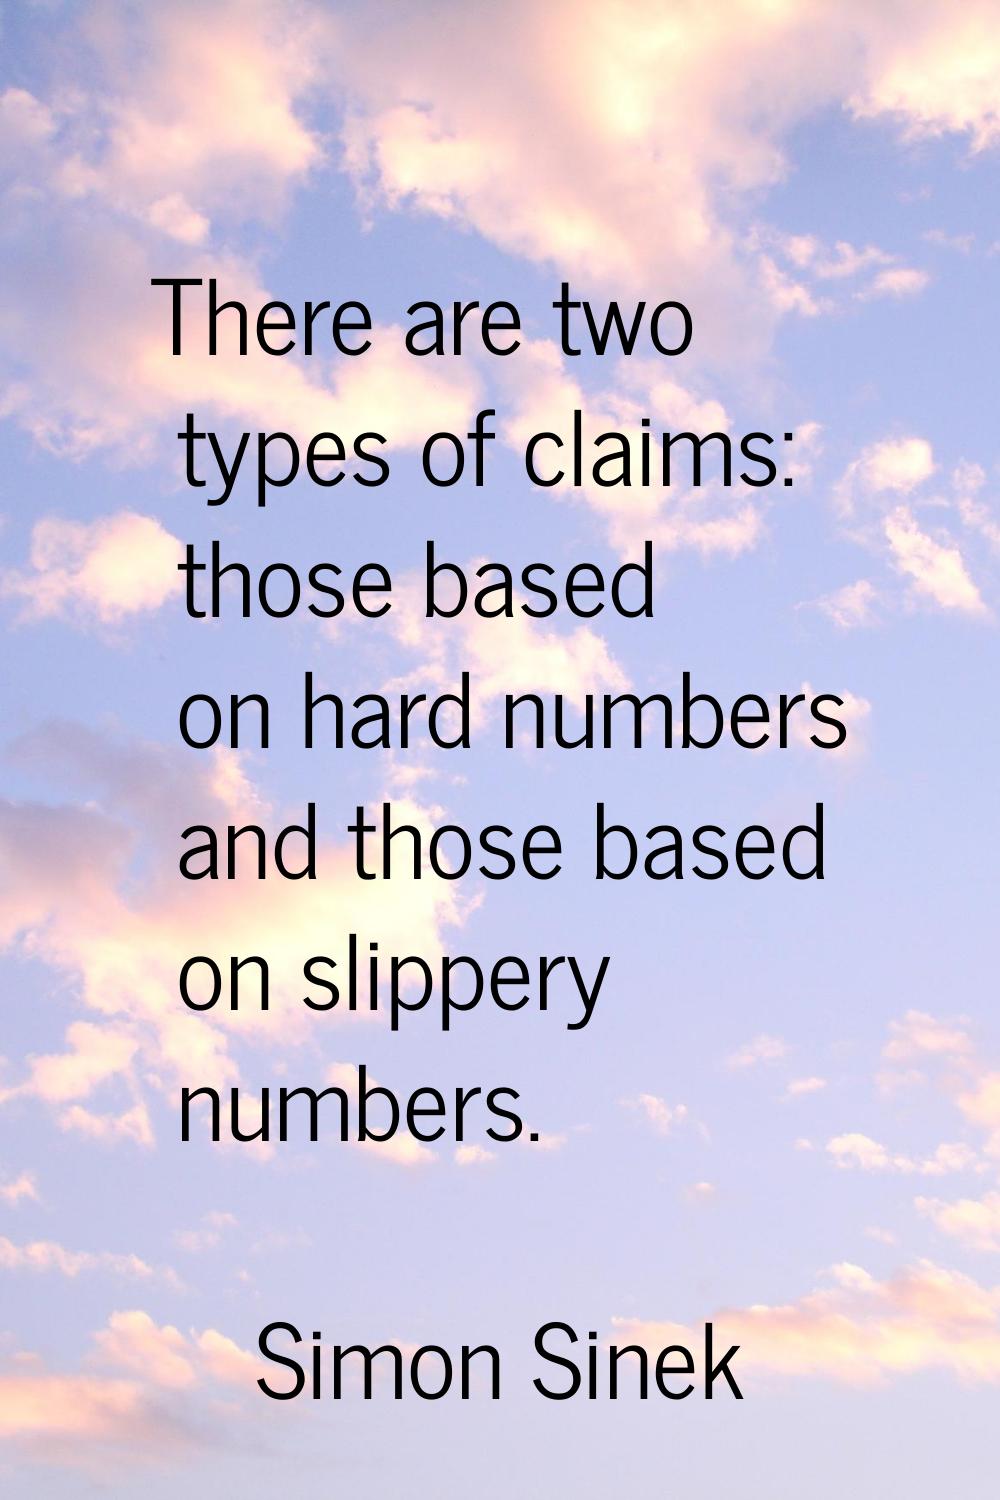 There are two types of claims: those based on hard numbers and those based on slippery numbers.